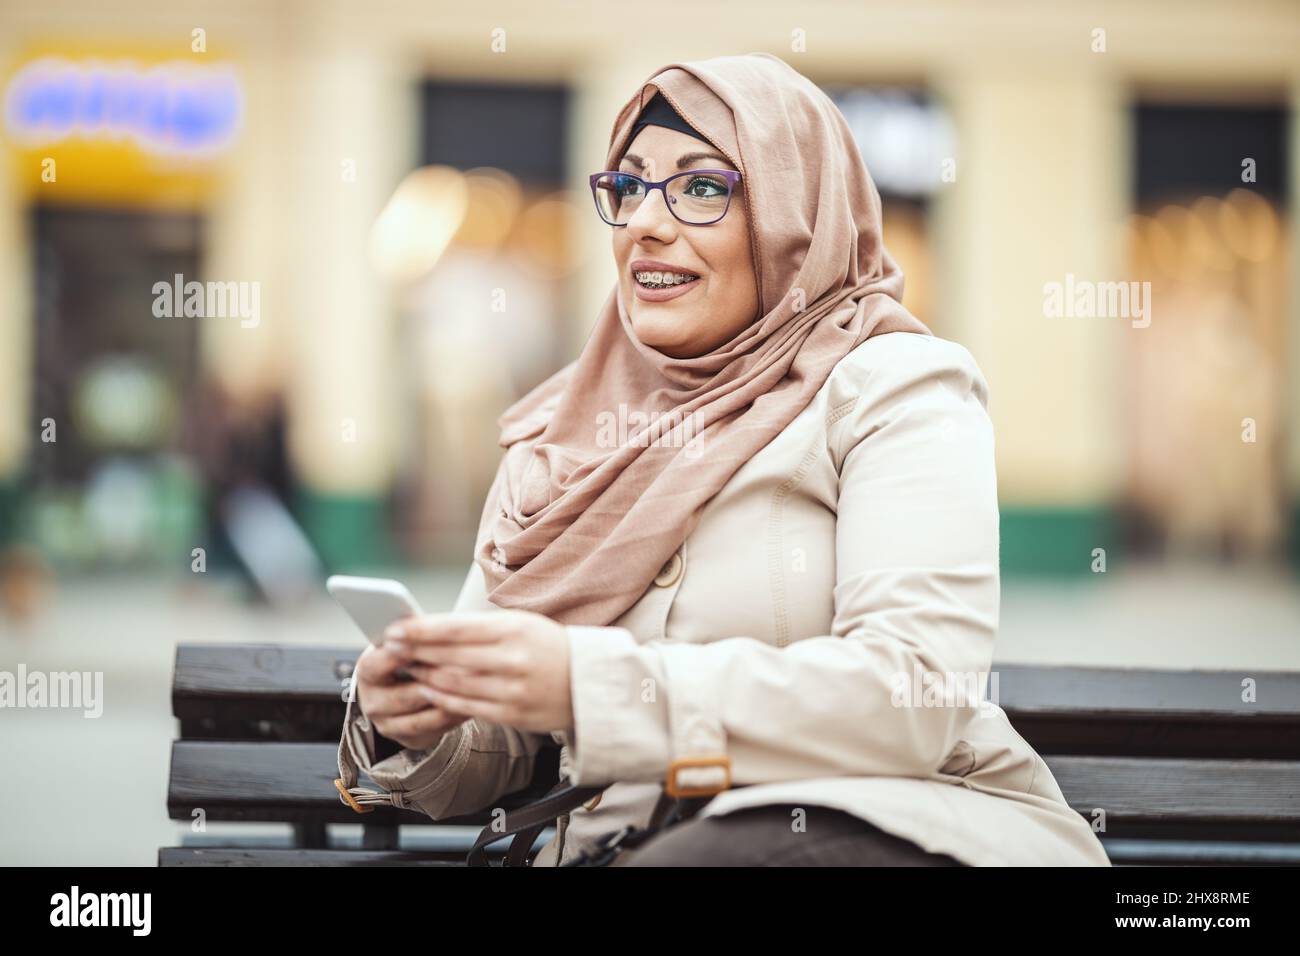 Middle aged Muslim woman wearing hijab with a happy face is sitting on the bench in urban environment, tipping messages on her smartphone. Stock Photo